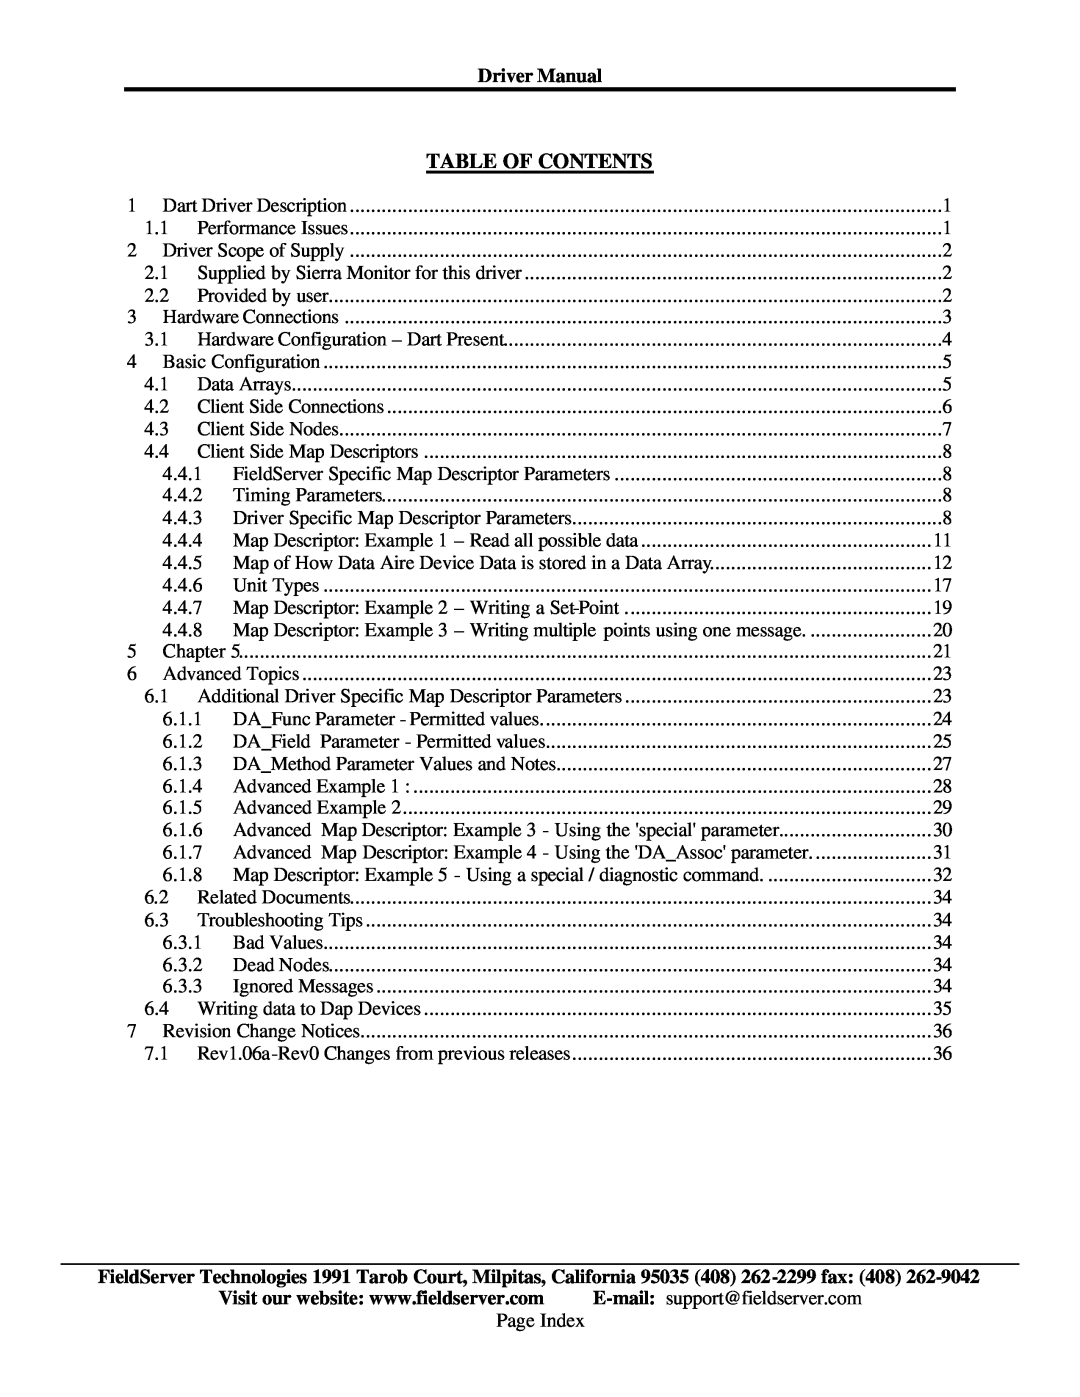 FieldServer FS-8700-78 instruction manual Table Of Contents, Driver Manual 